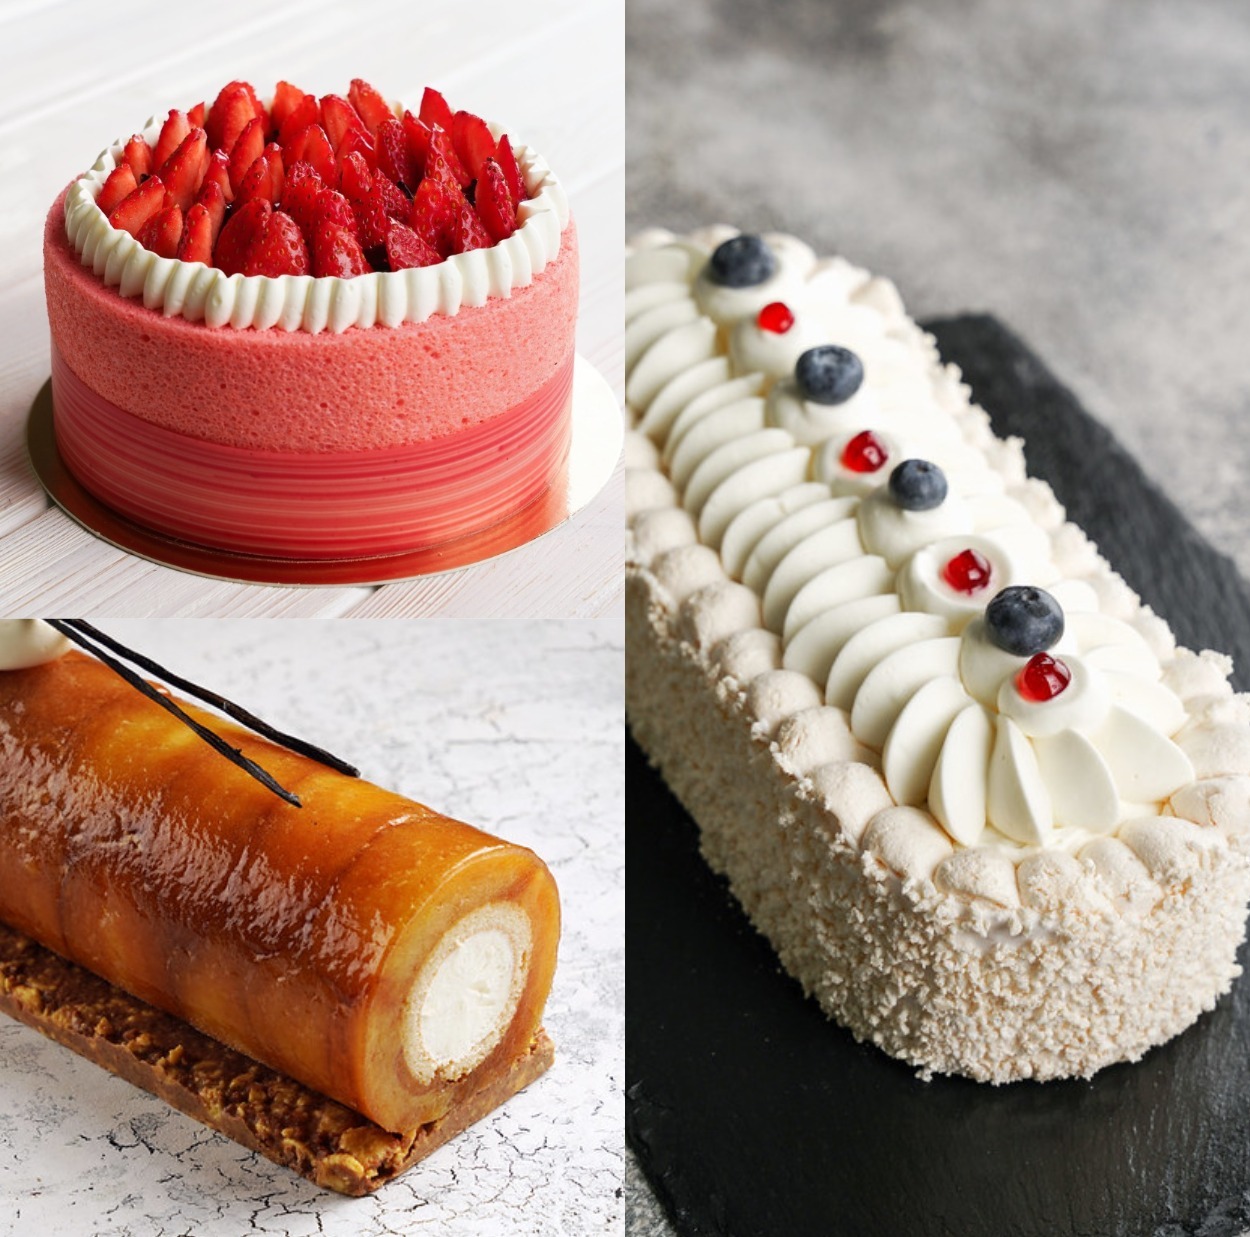 THE BEST DESSERTS BY NICOLAS BOUSSIN